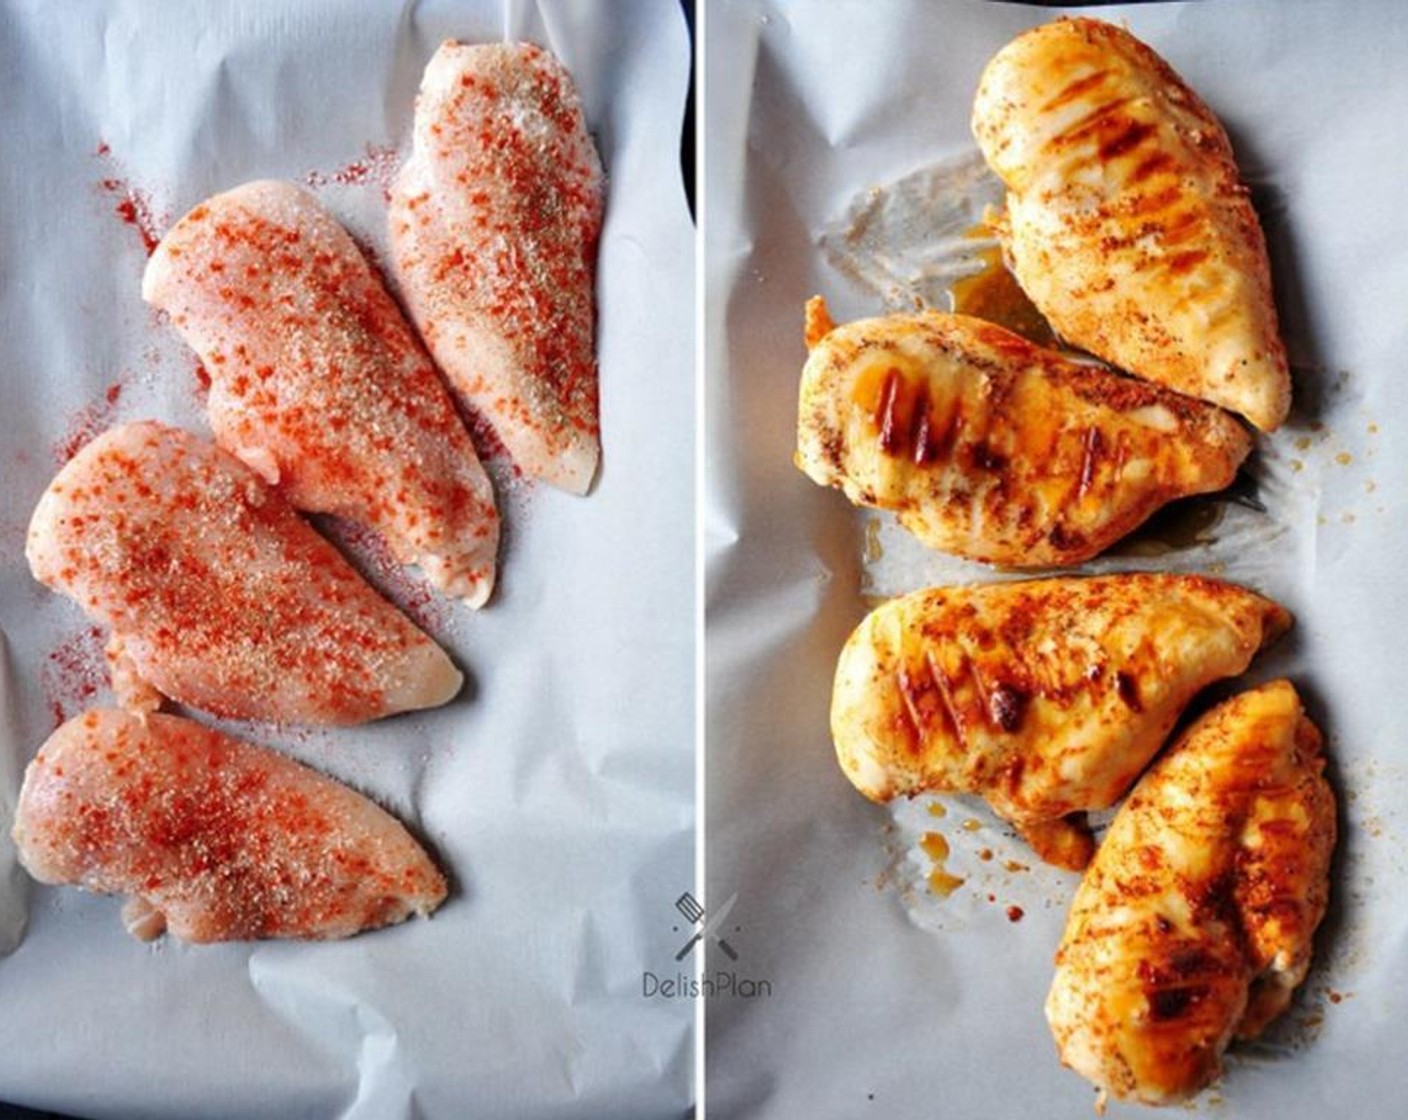 step 2 Rinse Boneless, Skinless Chicken Breasts (4) and pat dry with paper towels. Brush both sides with Extra-Virgin Olive Oil (1/4 cup). Season with Kosher Salt (1/2 Tbsp), Ground Black Pepper (1/2 tsp) and Paprika (1/2 Tbsp) evenly and set aside.